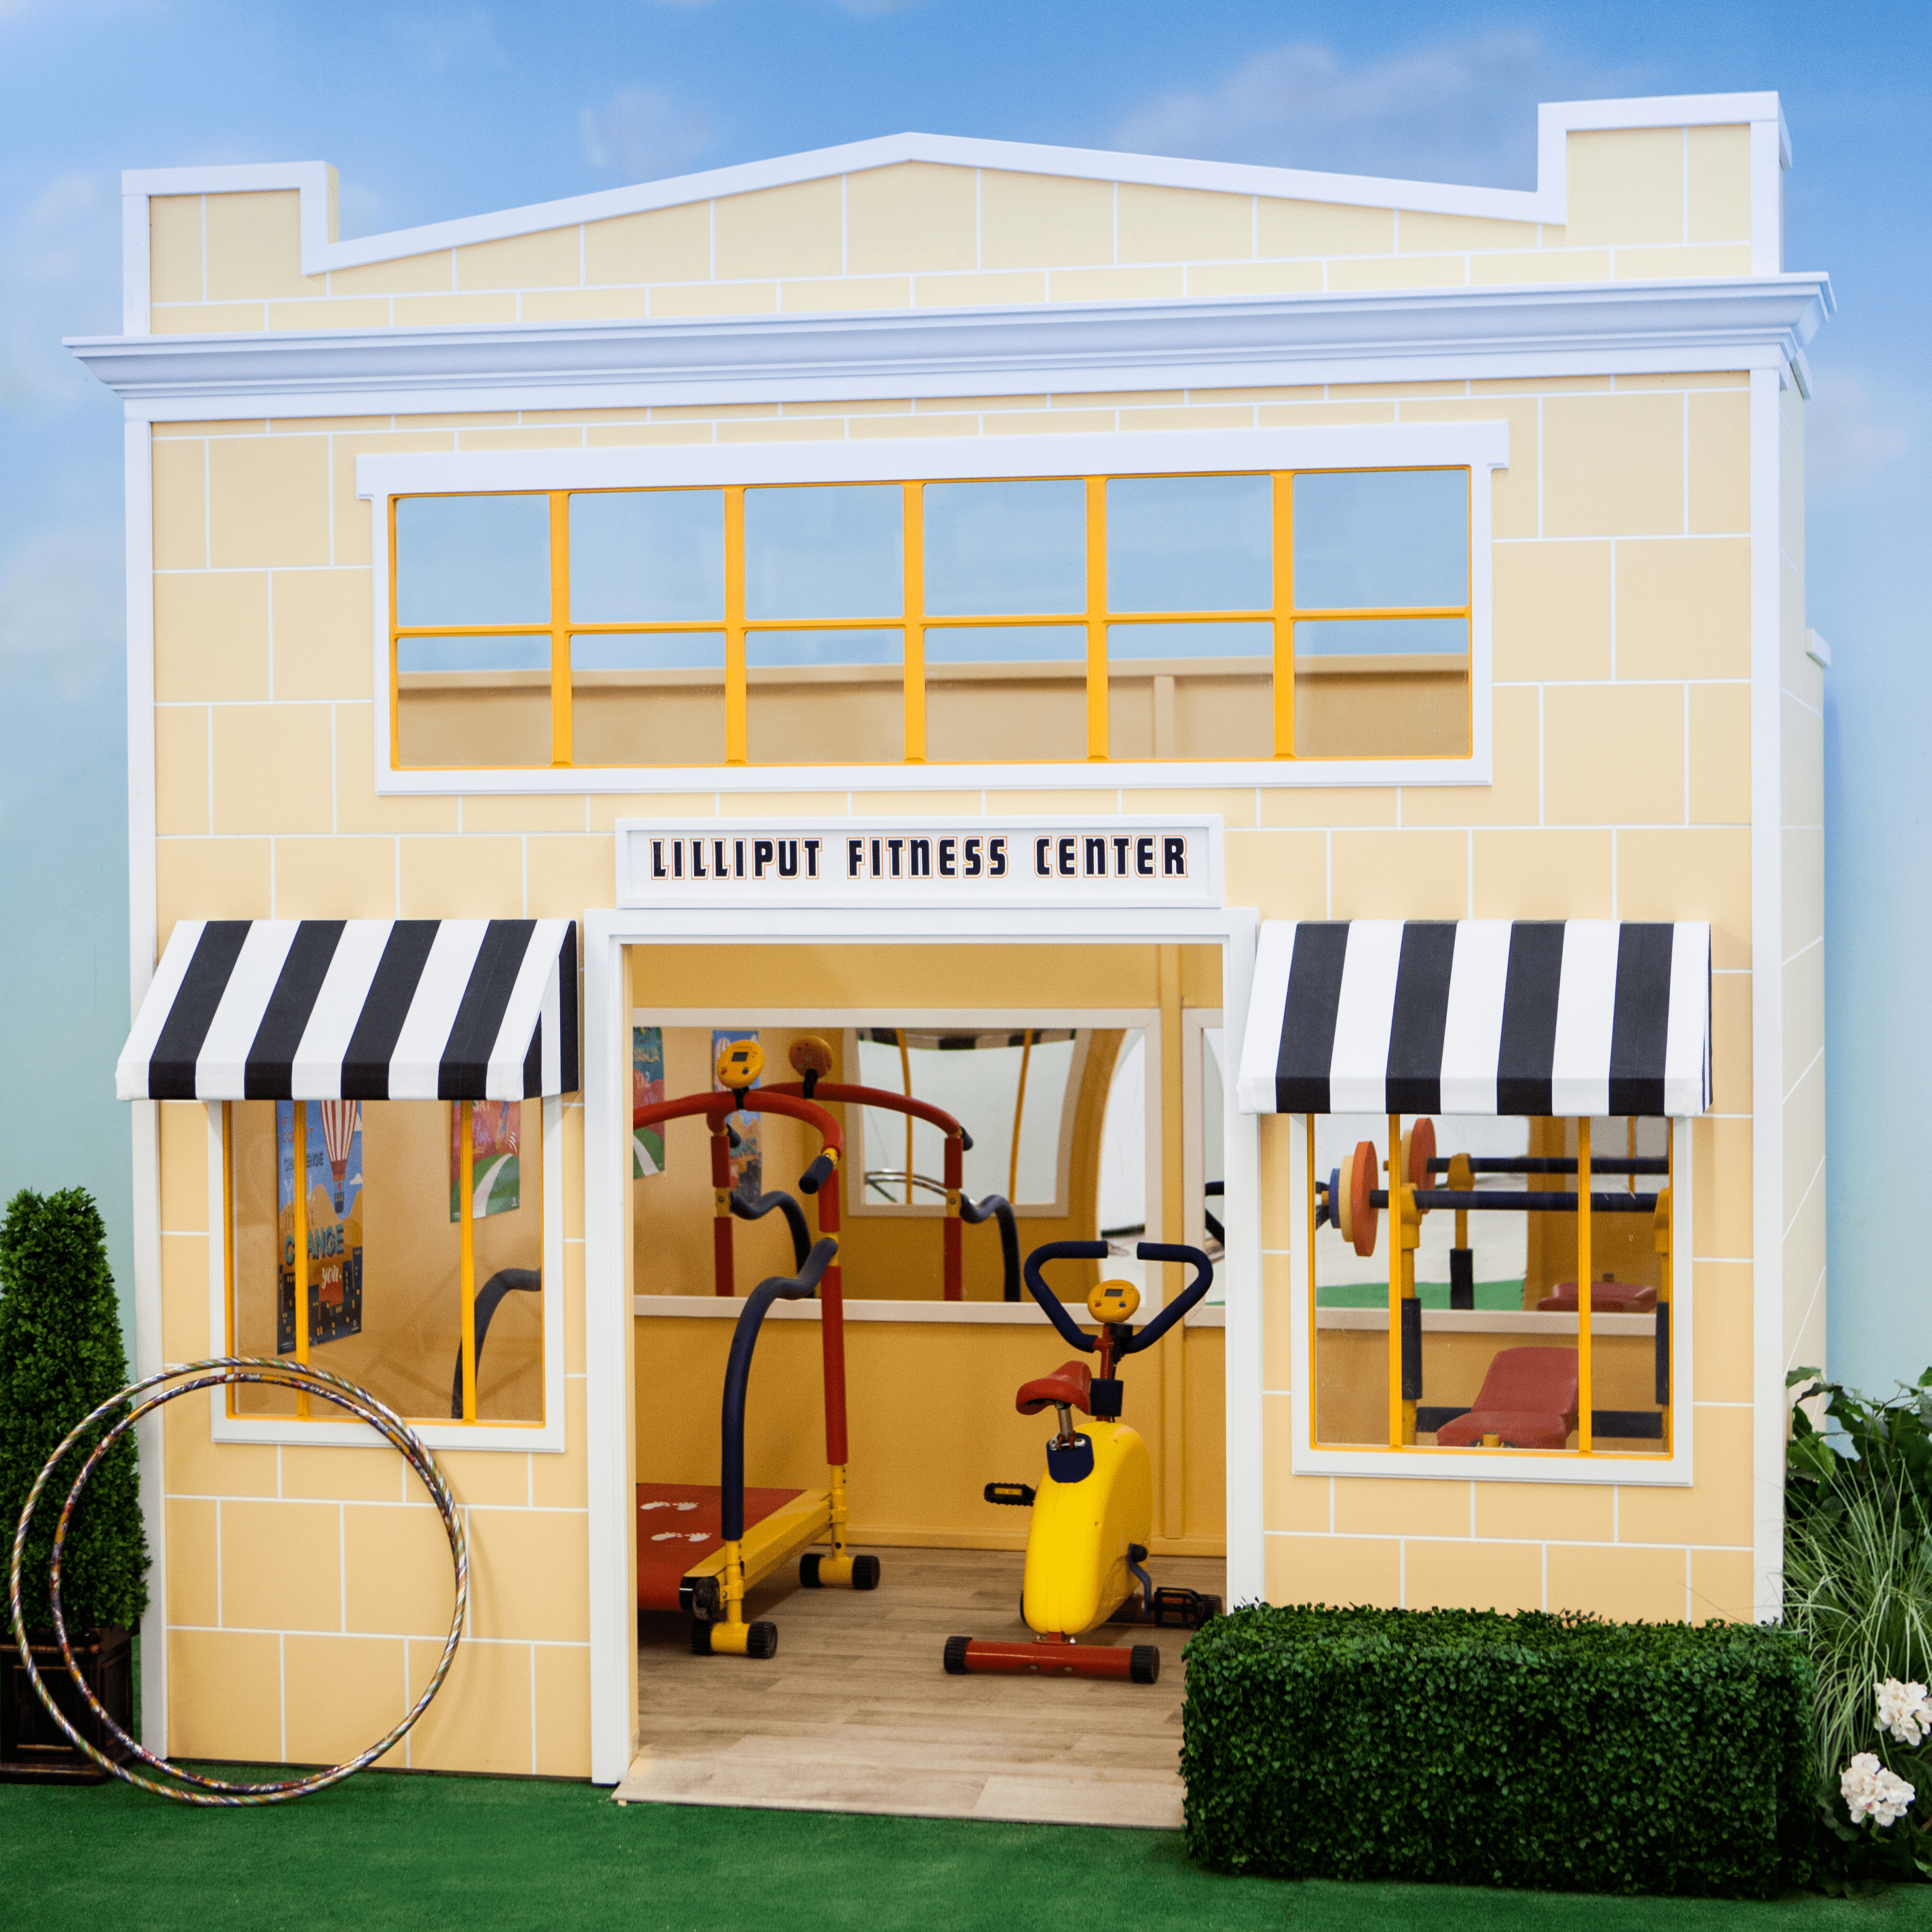 Uptown Fitness Center | Lilliput Play Homes -   18 fitness Center wall ideas